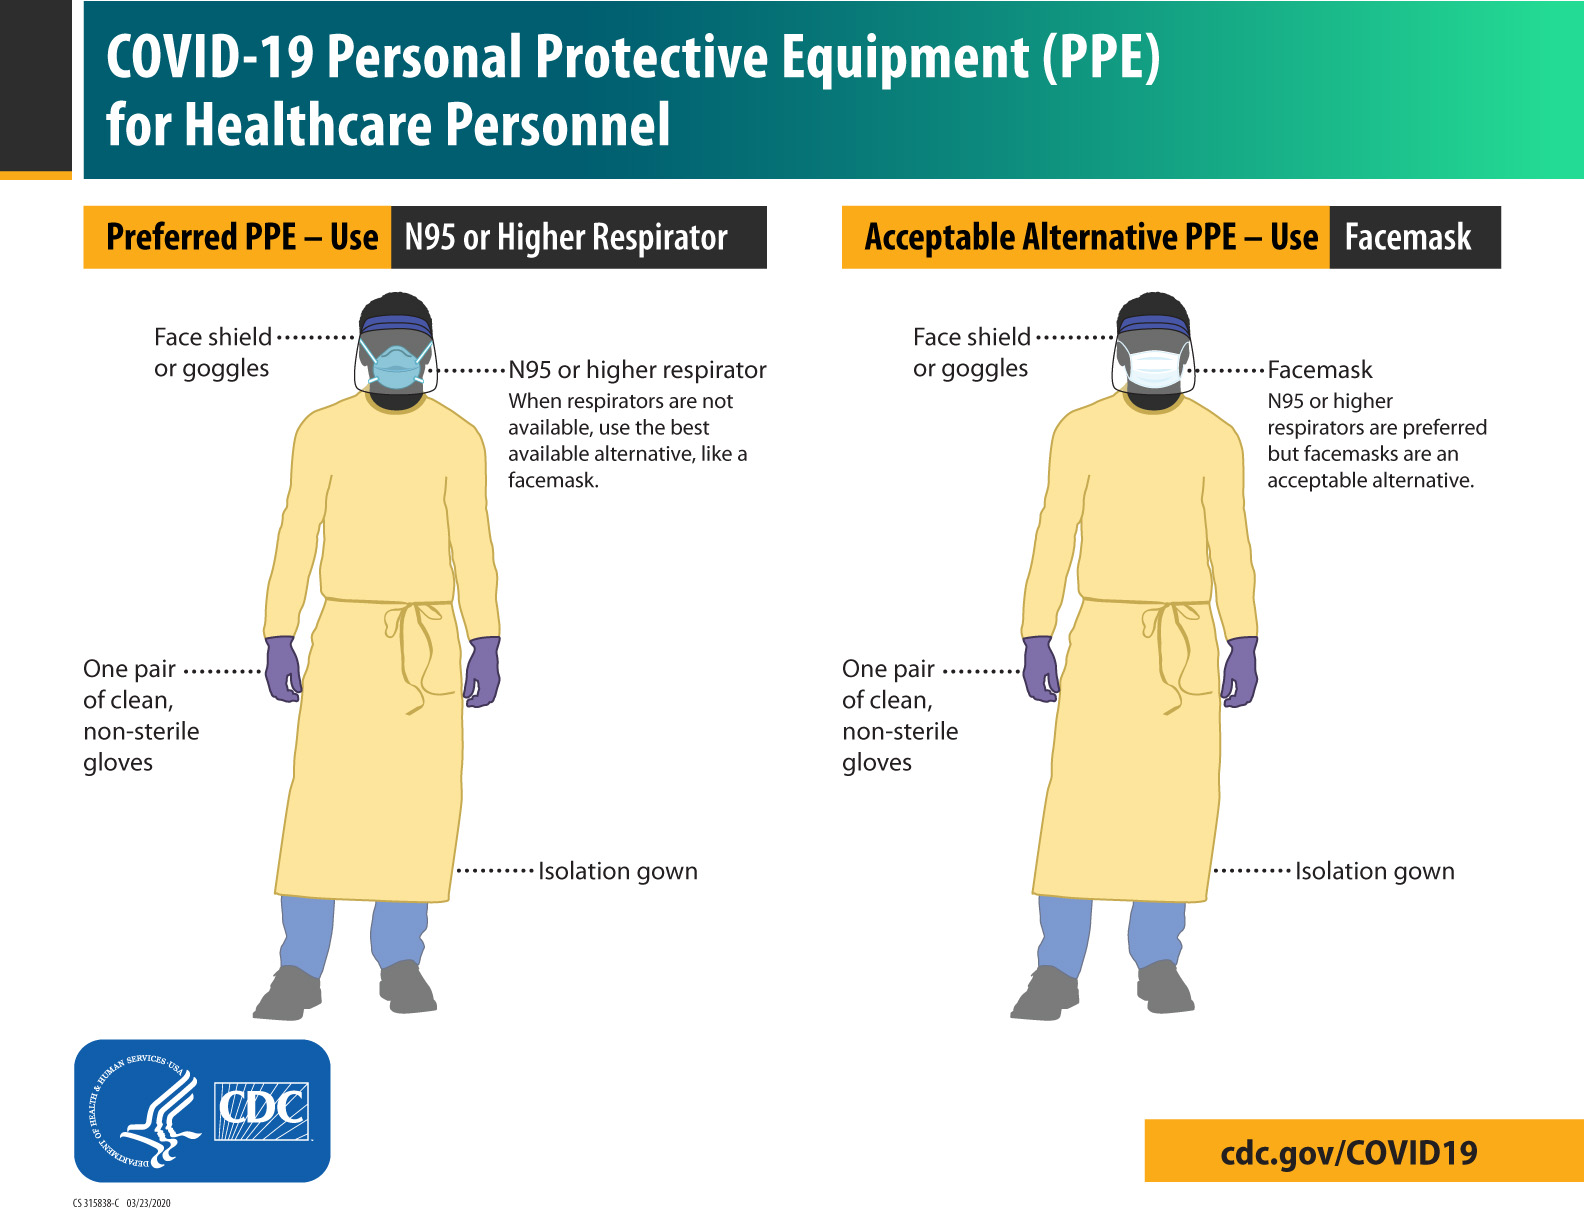 COVID-19 PPE for Healthcare Personnel